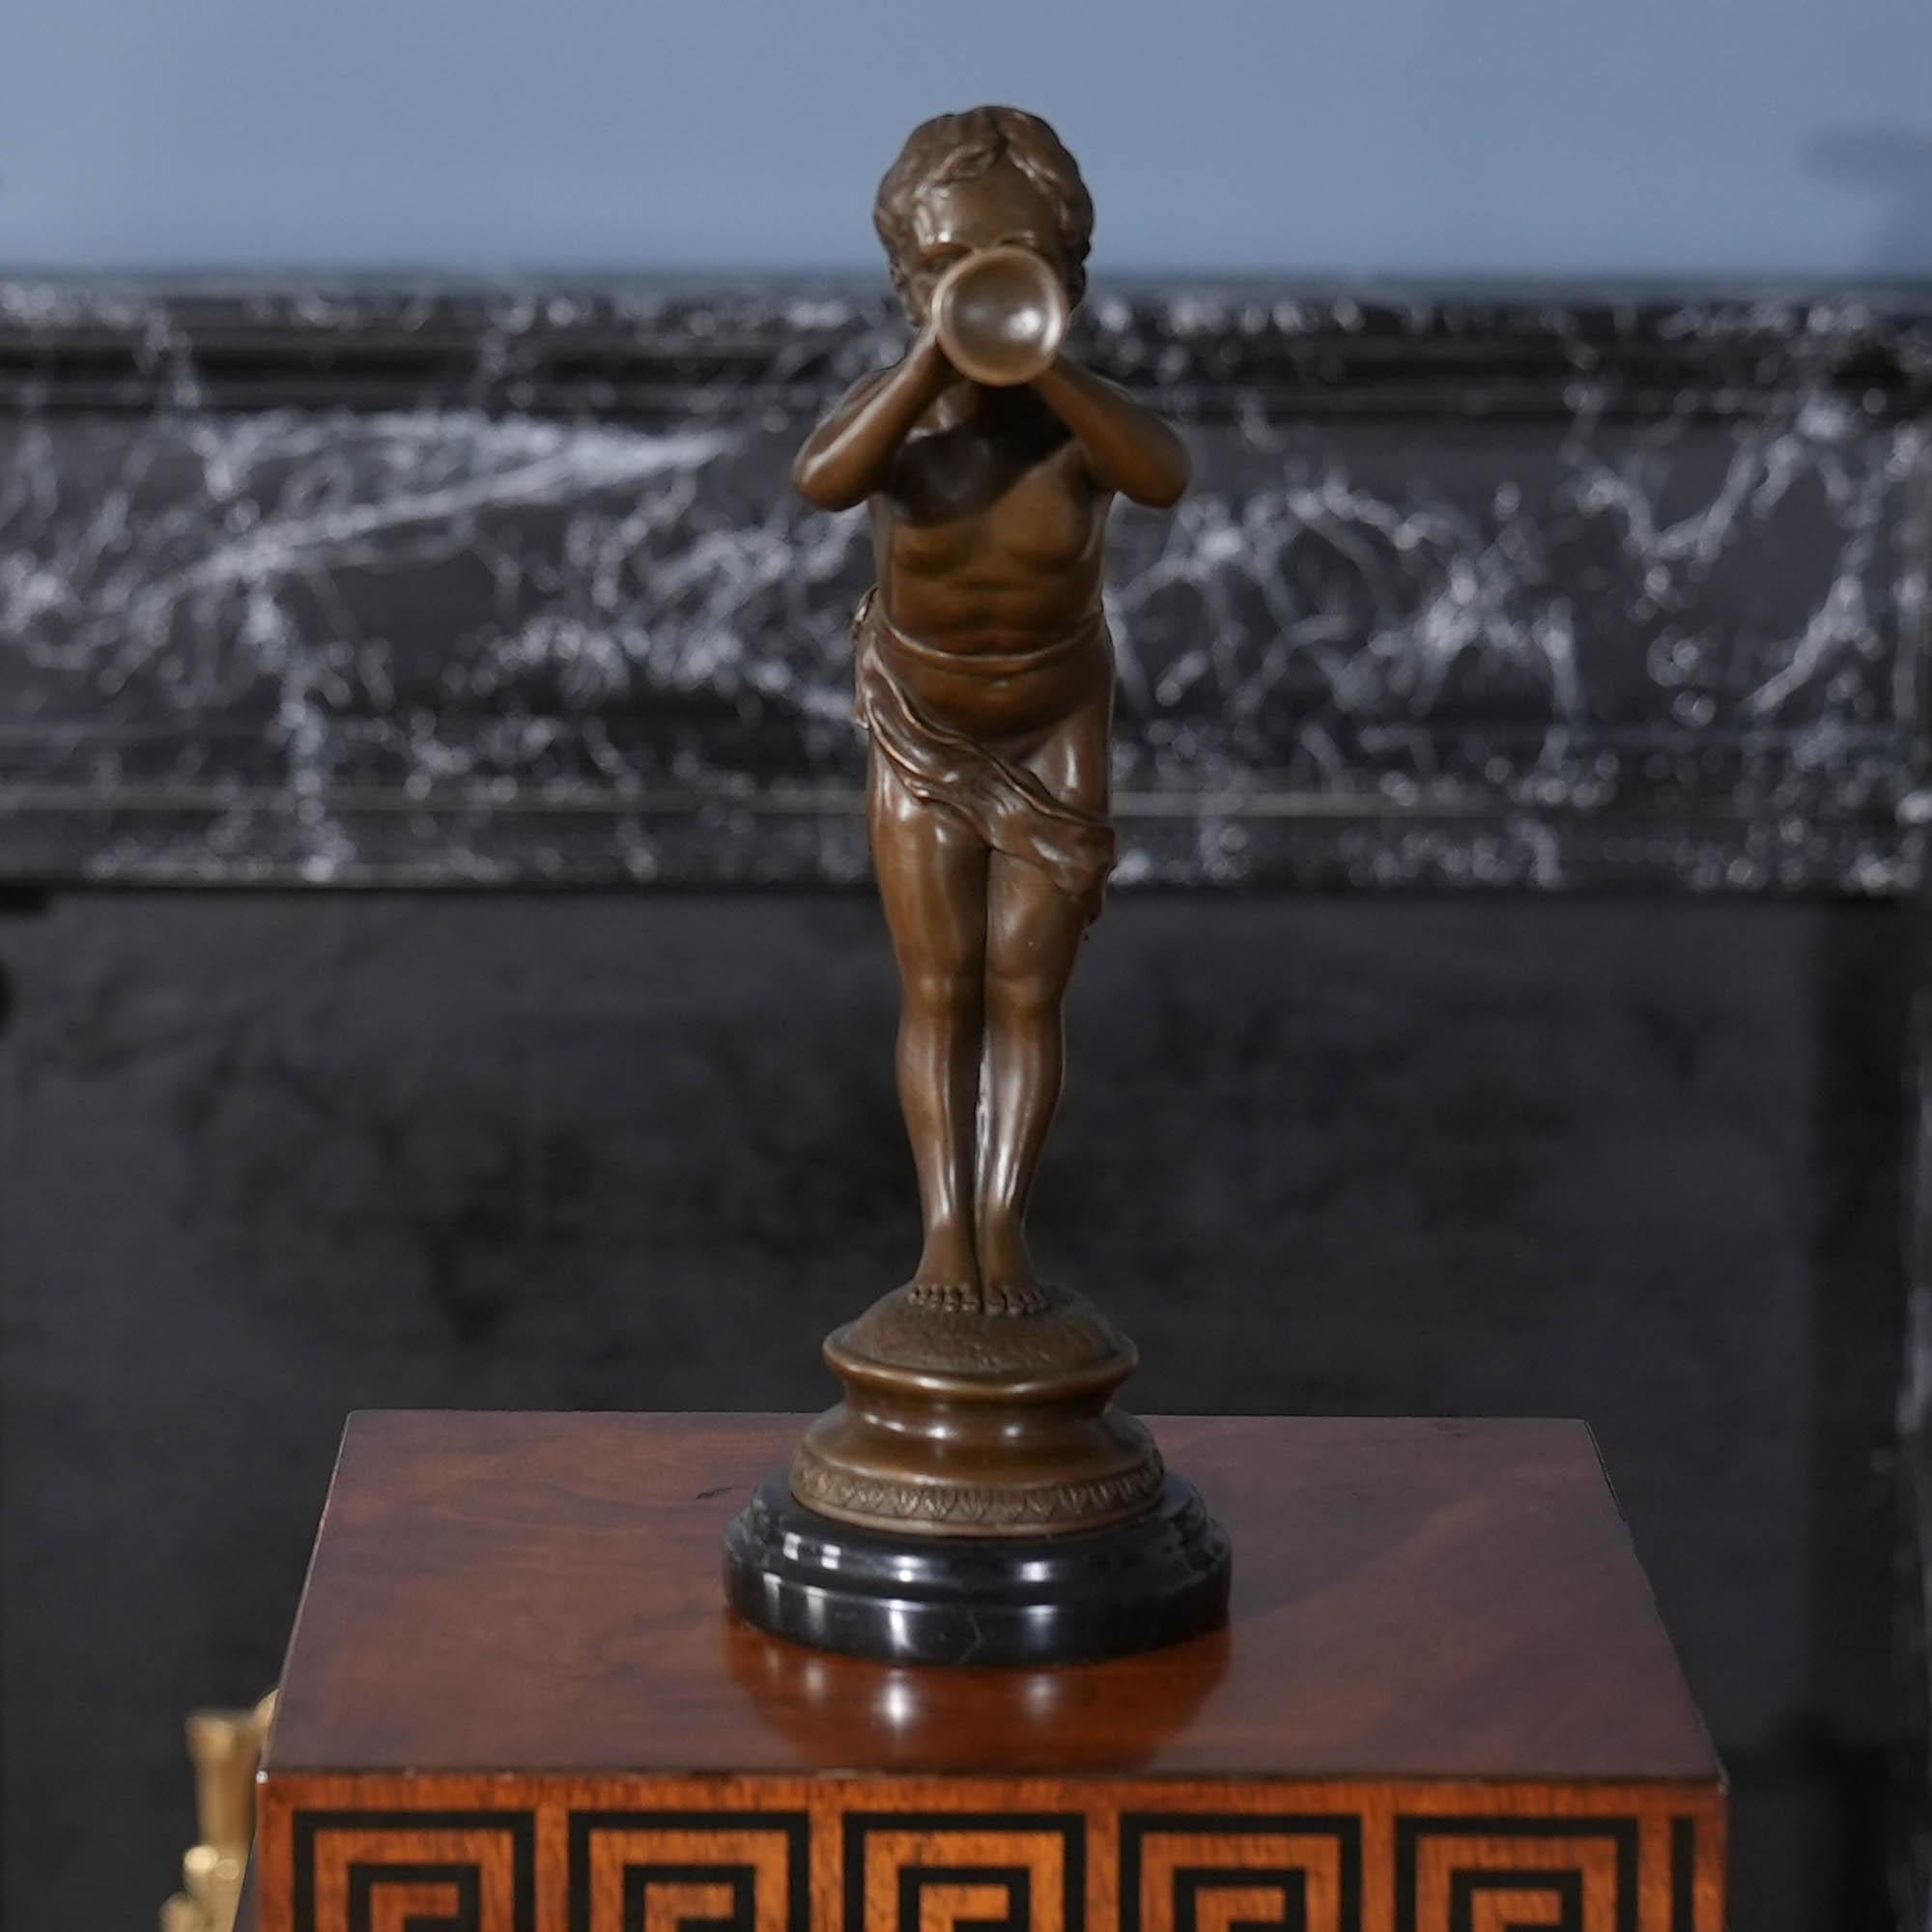 Graceful even when standing still the Bronze Boy with Bugle is a striking addition to any setting. Using traditional lost wax casting methods the Bronze Boy statue has hand chaised details added to give a high level of detail to the figure. The